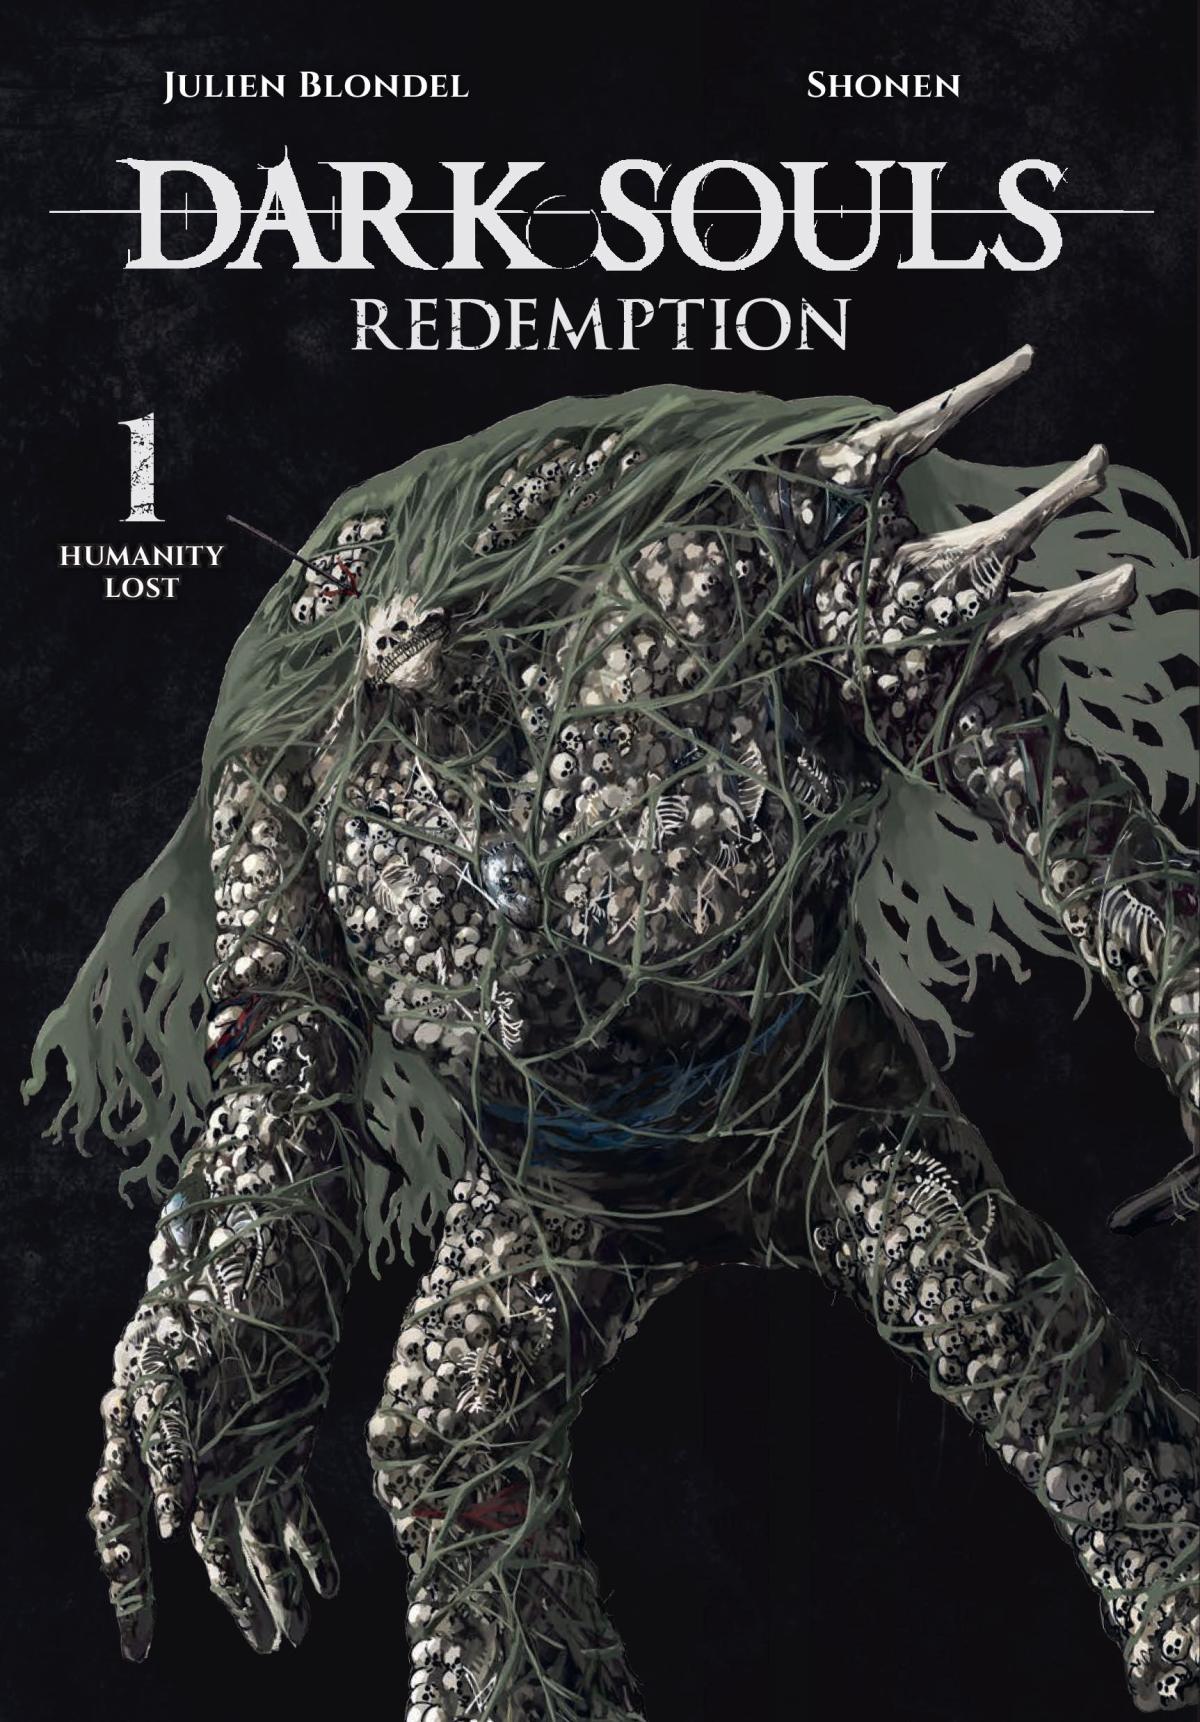 The Dark Souls: Redemption manga launched in August 